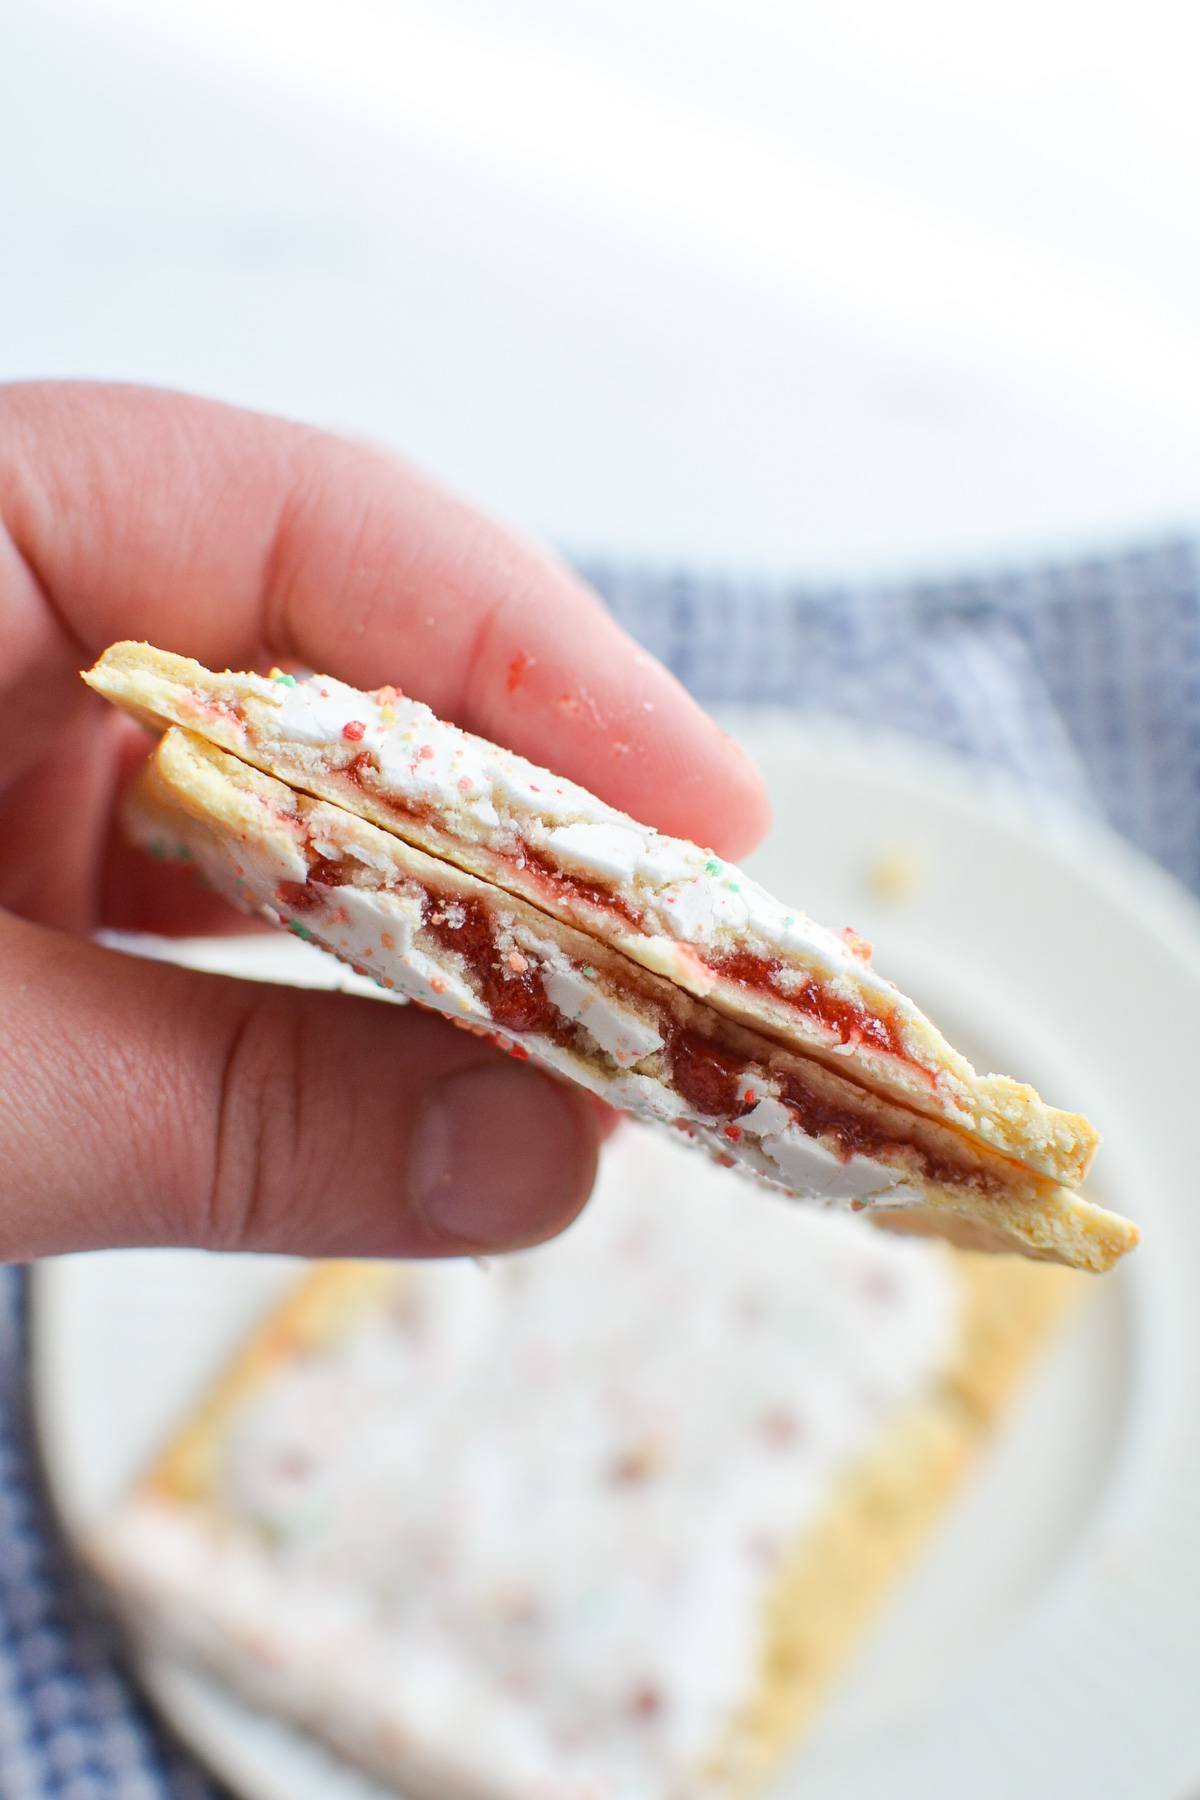 A hand holding pop tarts with a strawberry filling.